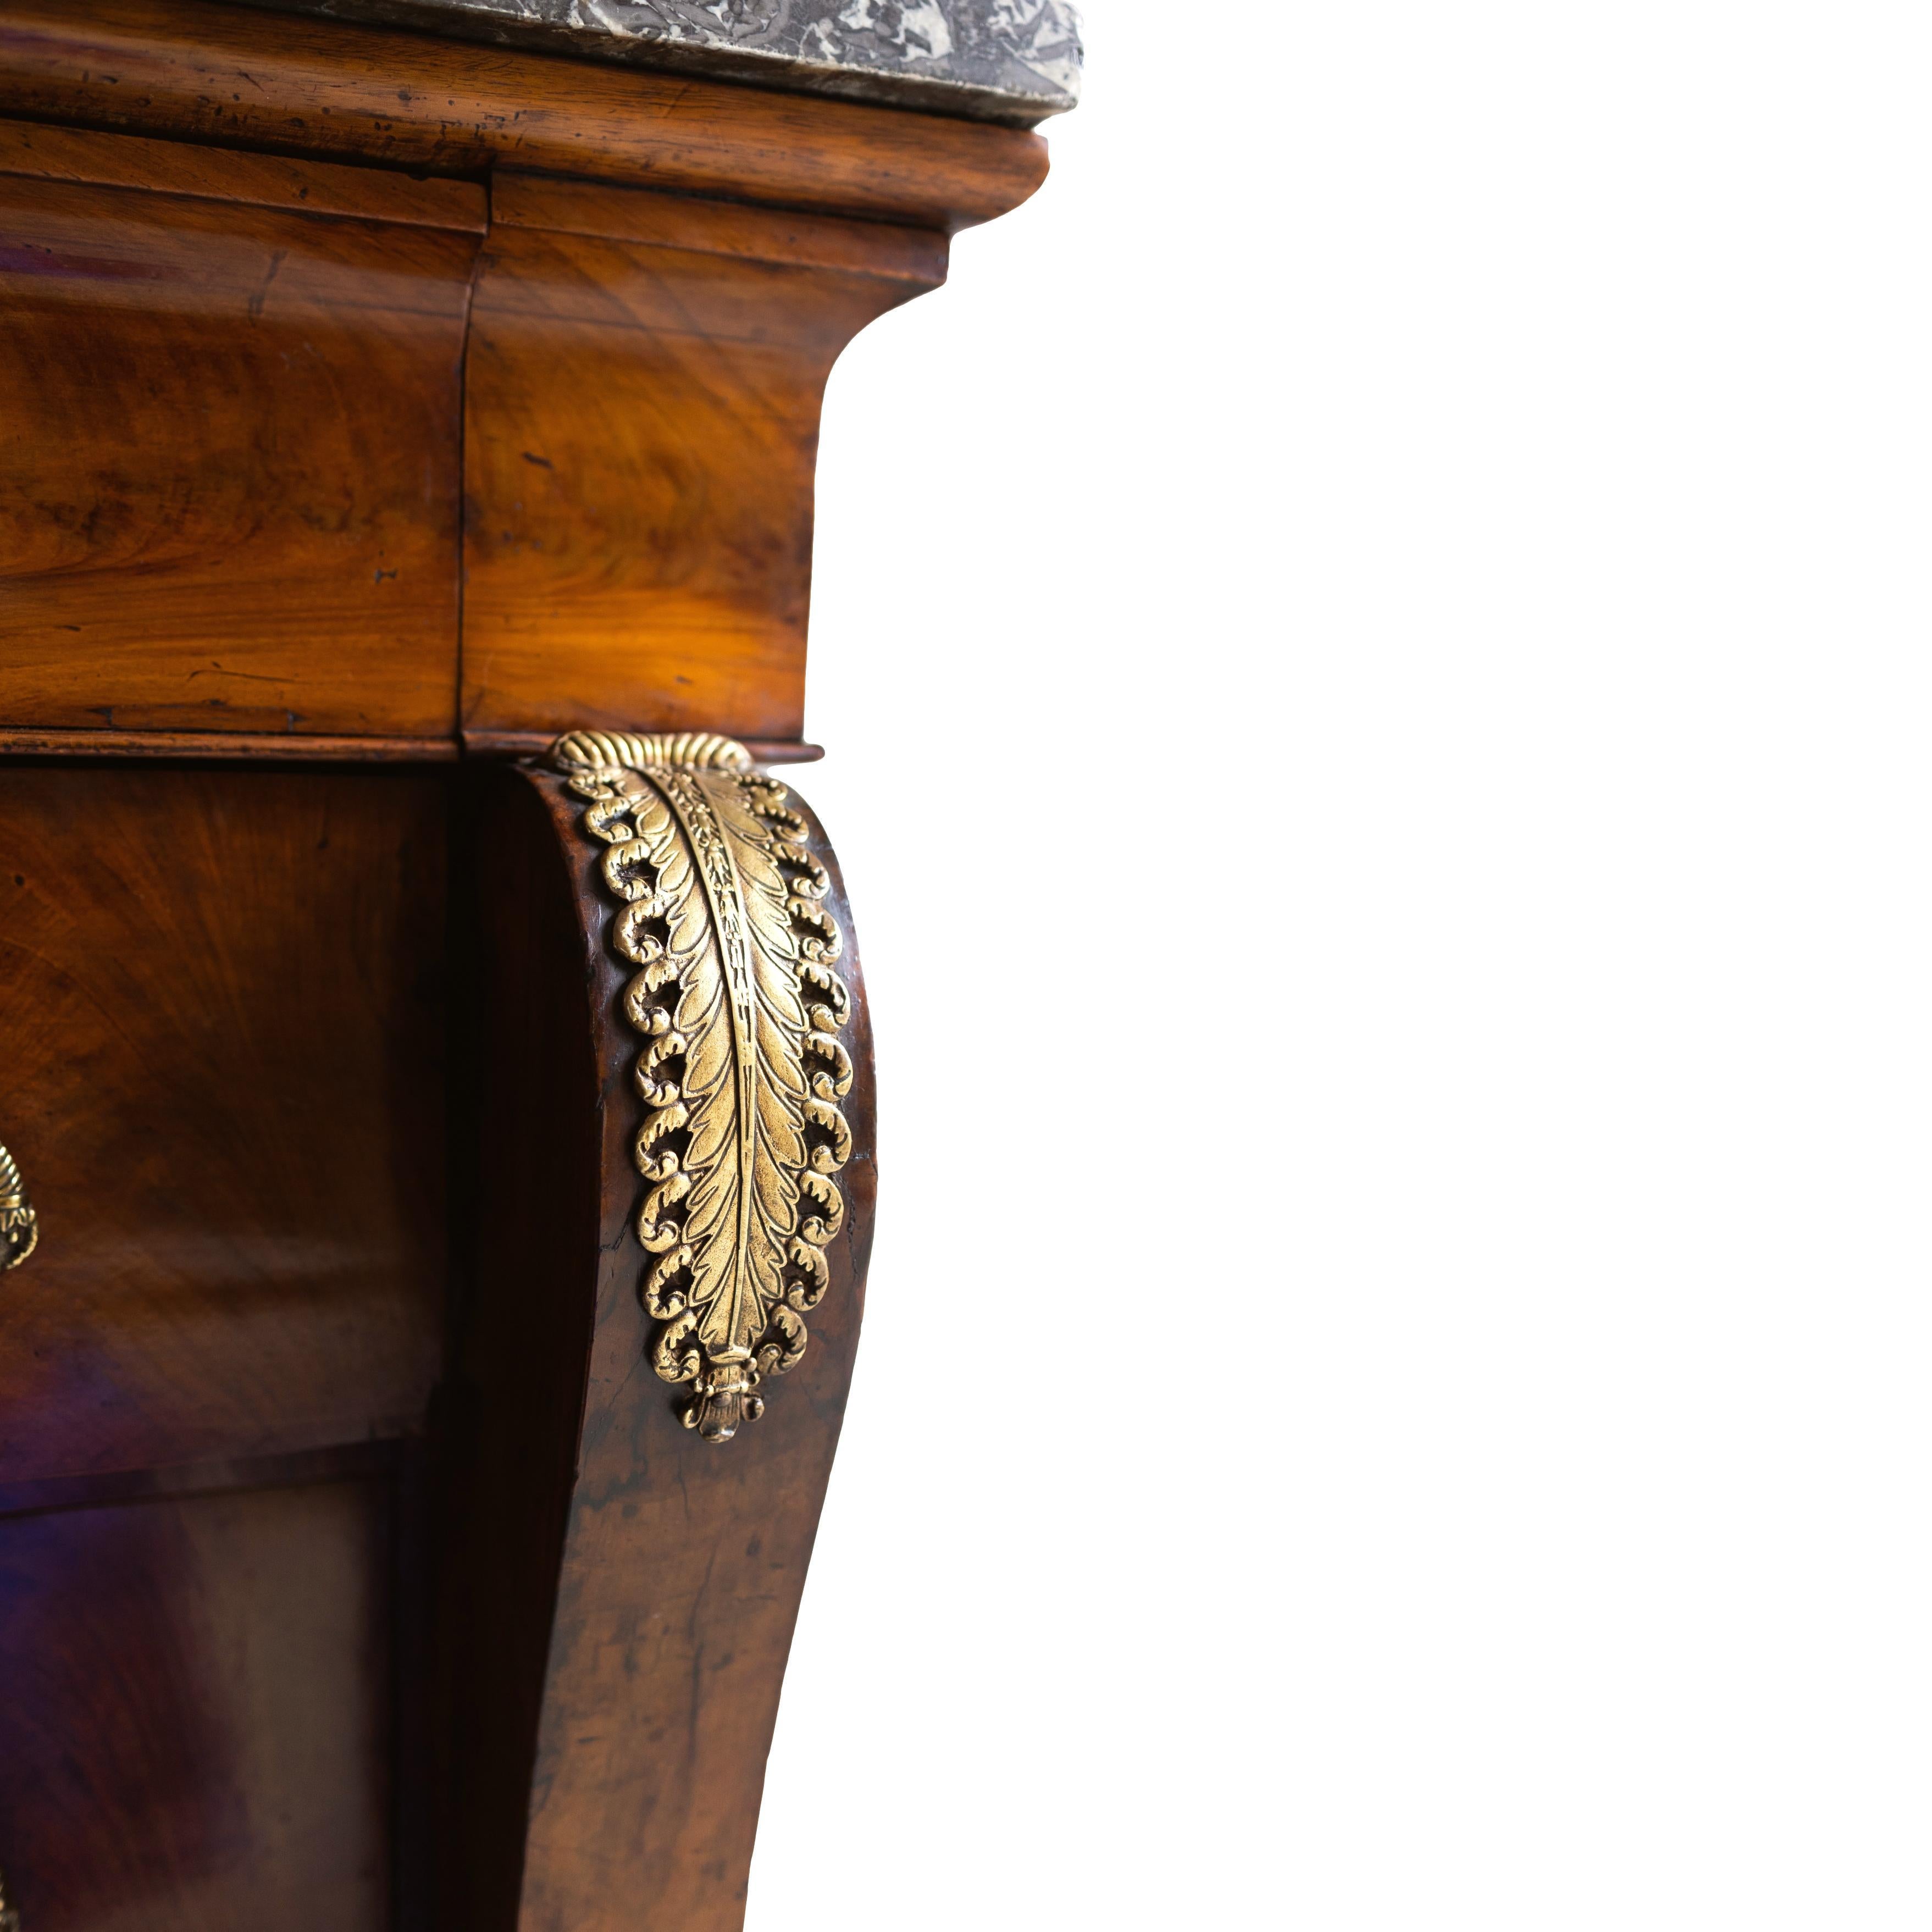 An Empire Ormolu-Mounted Mahogany Commode, Marble Top, French, ca. 1820 For Sale 6